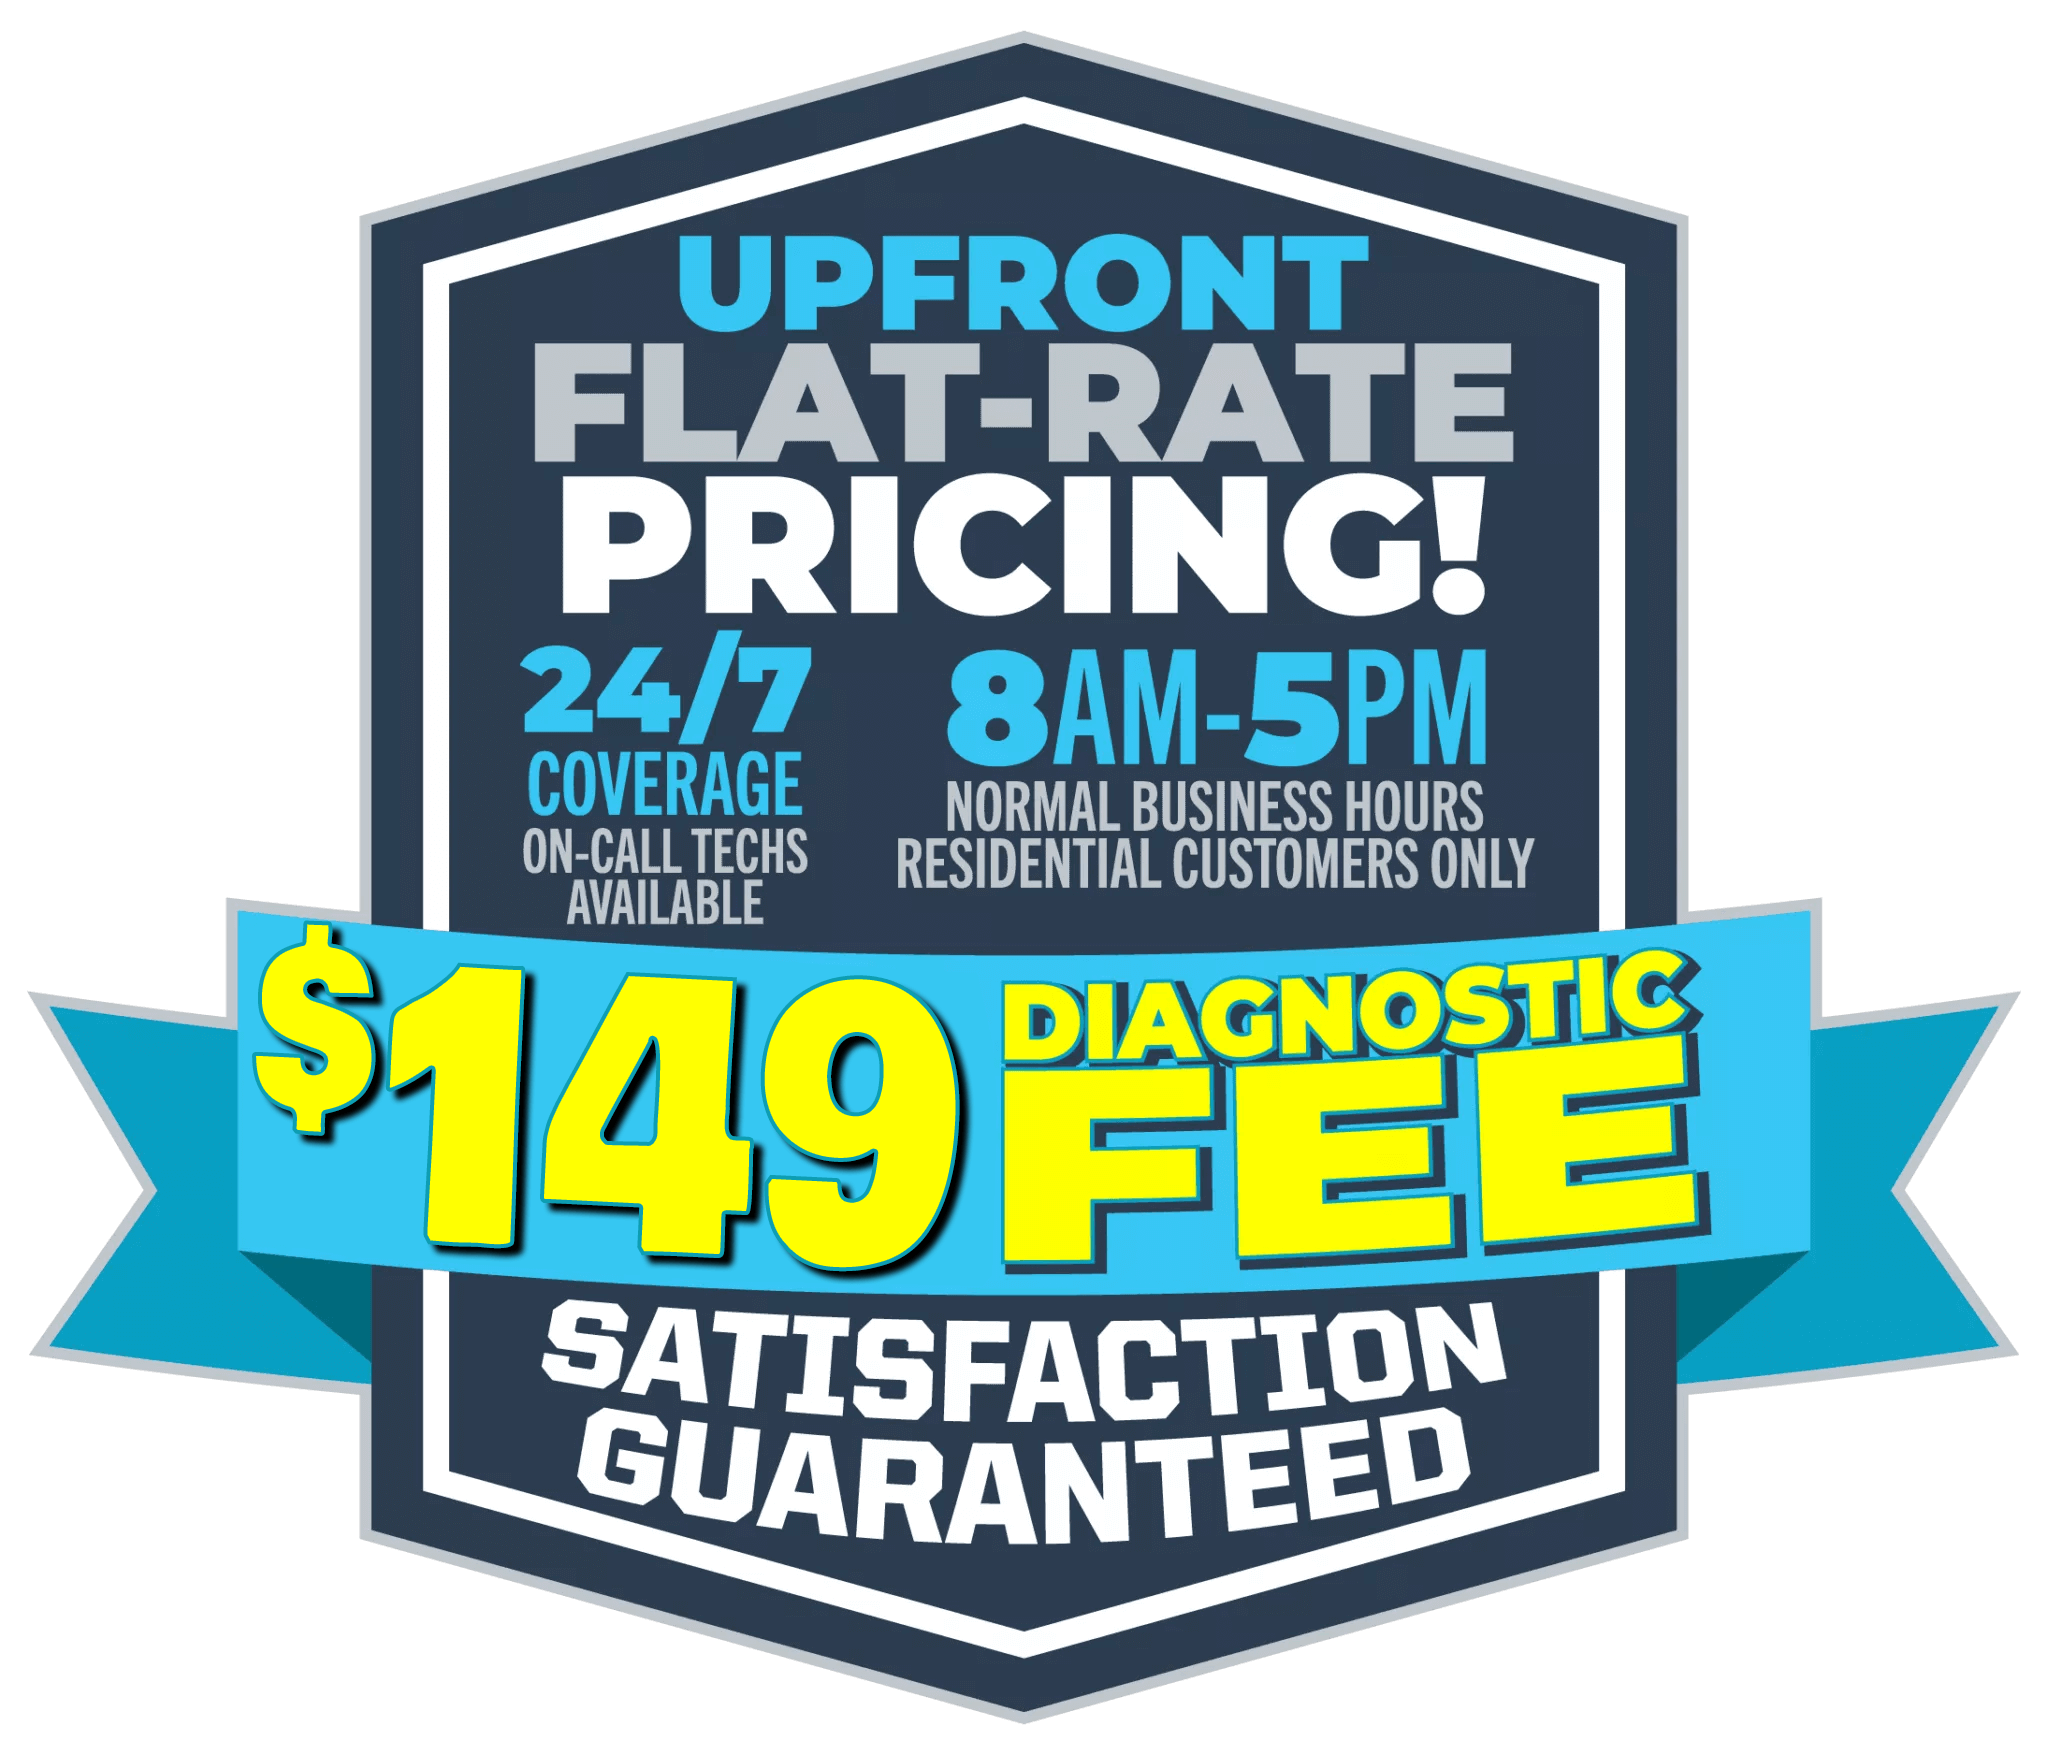 When we service your Air Conditioner in Southfield MI, your satifaction means the world to us.